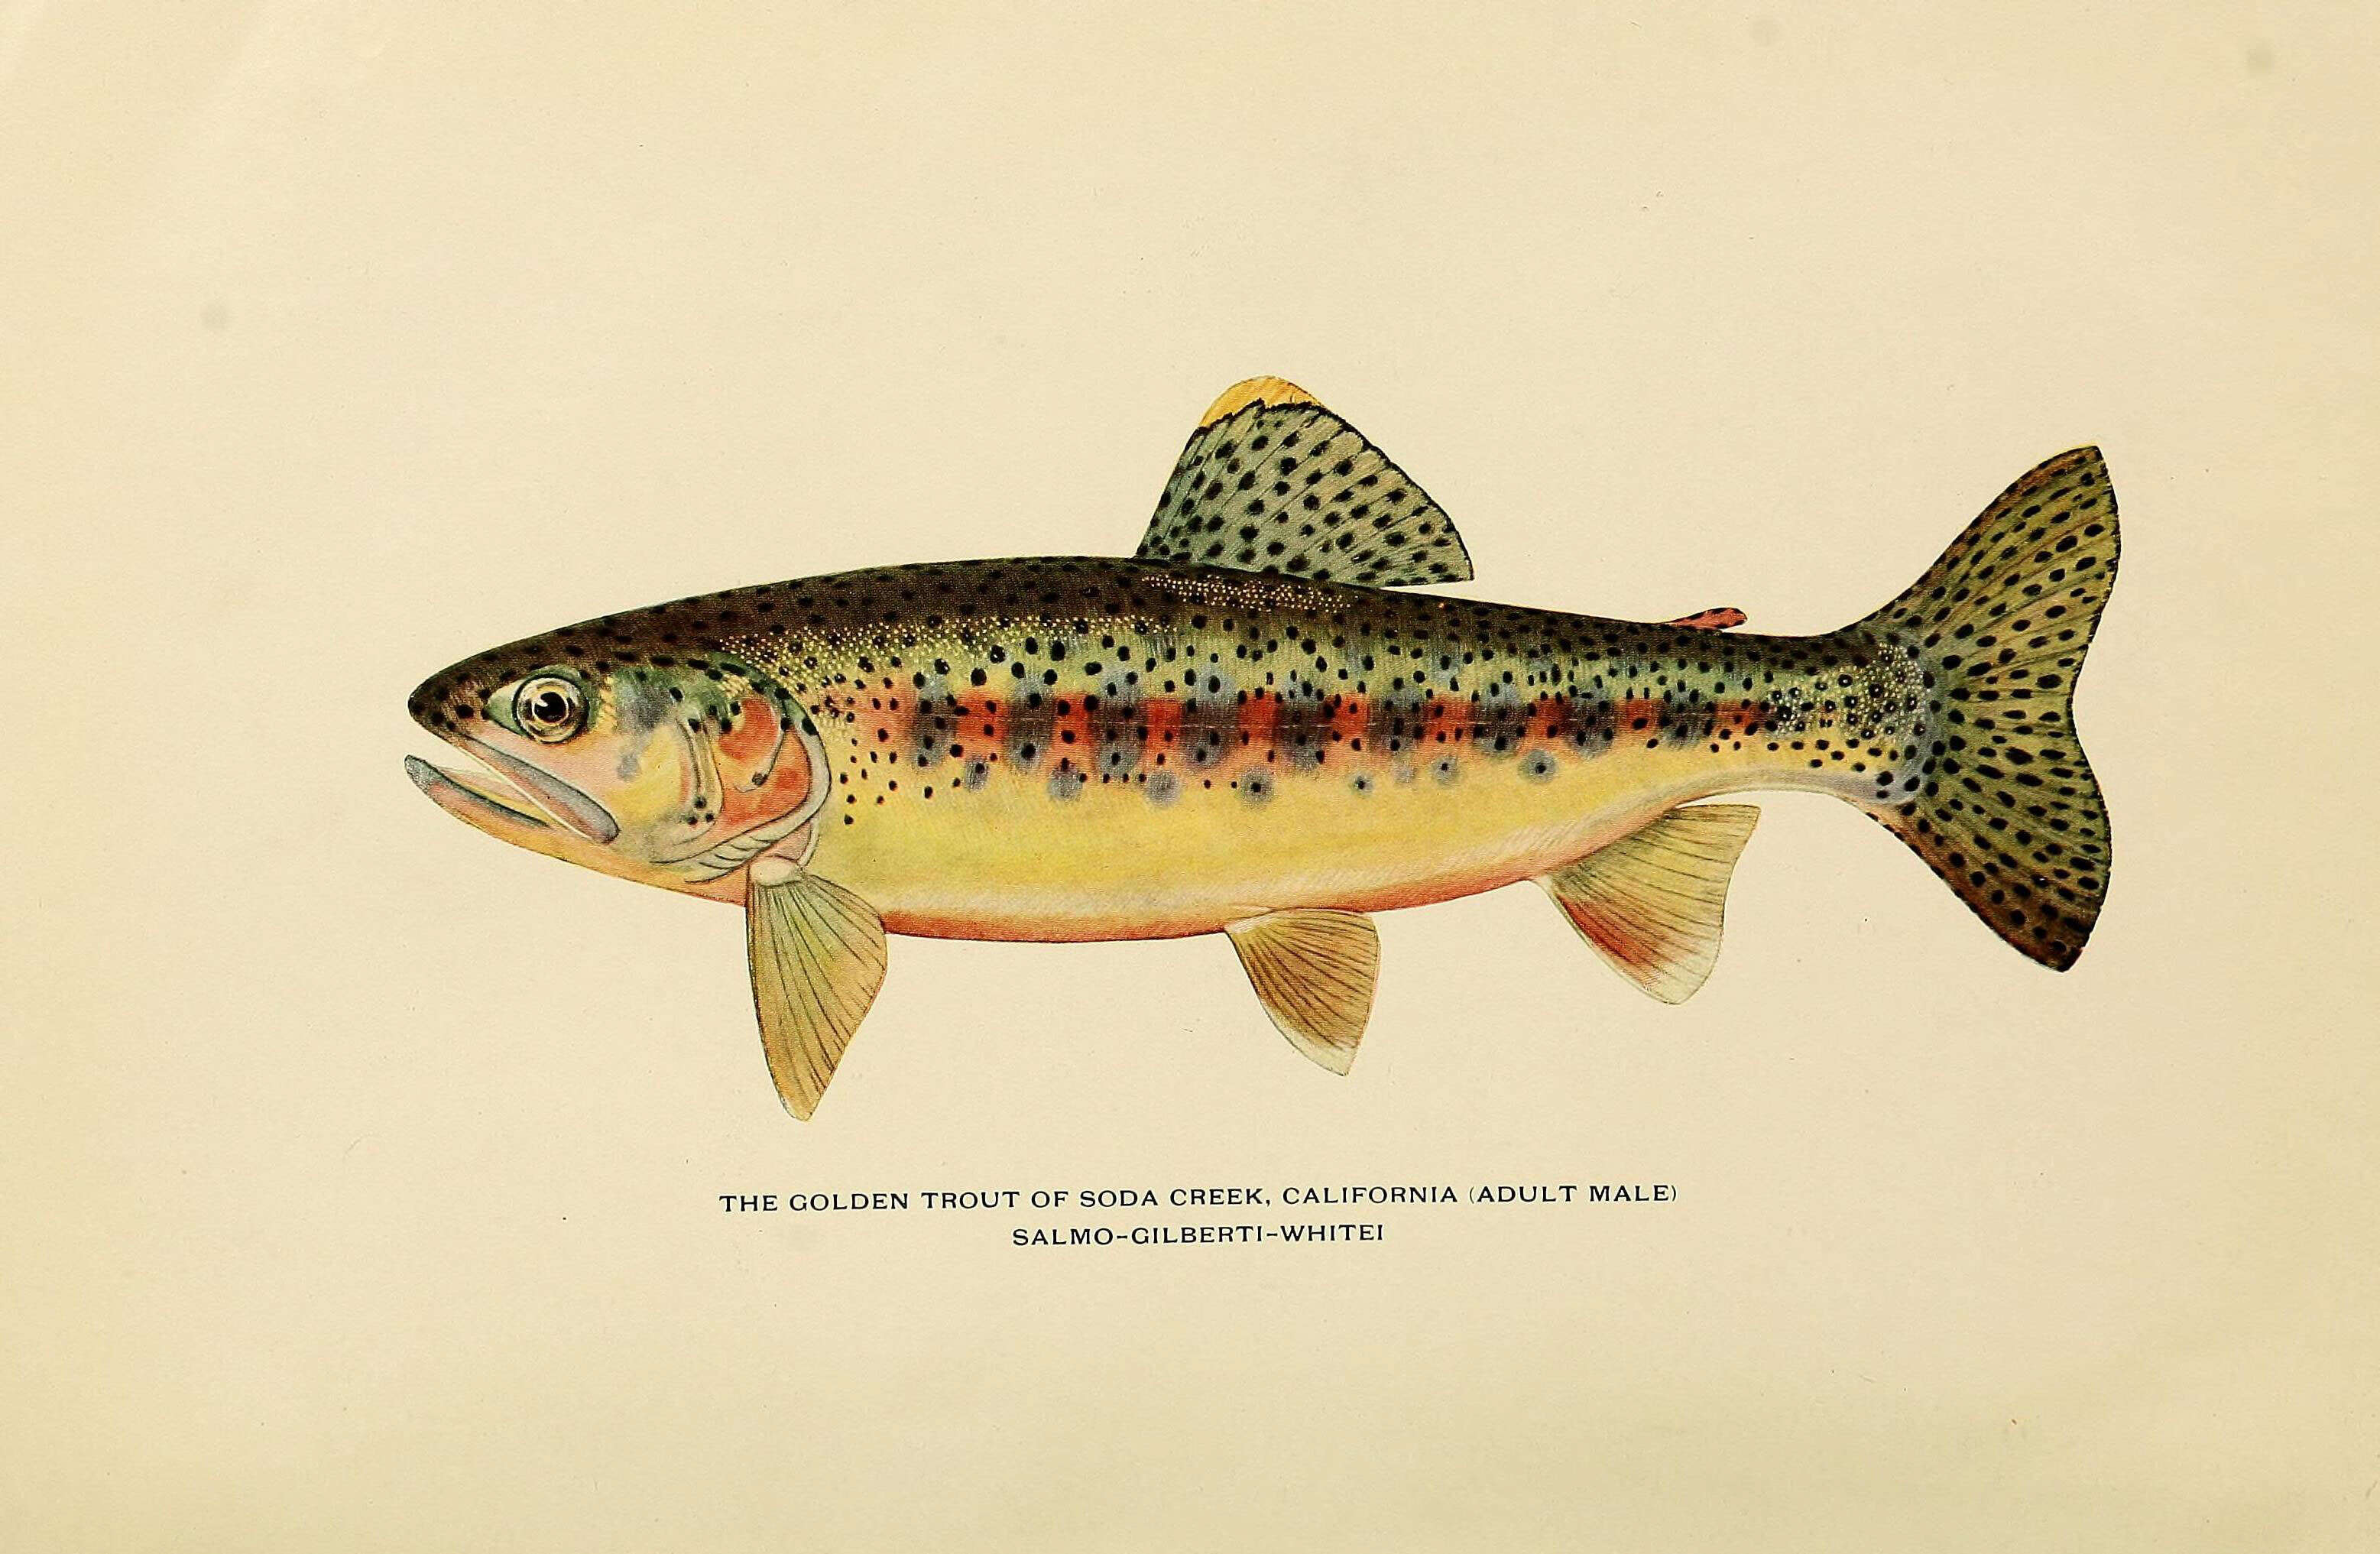 Image of Golden trout